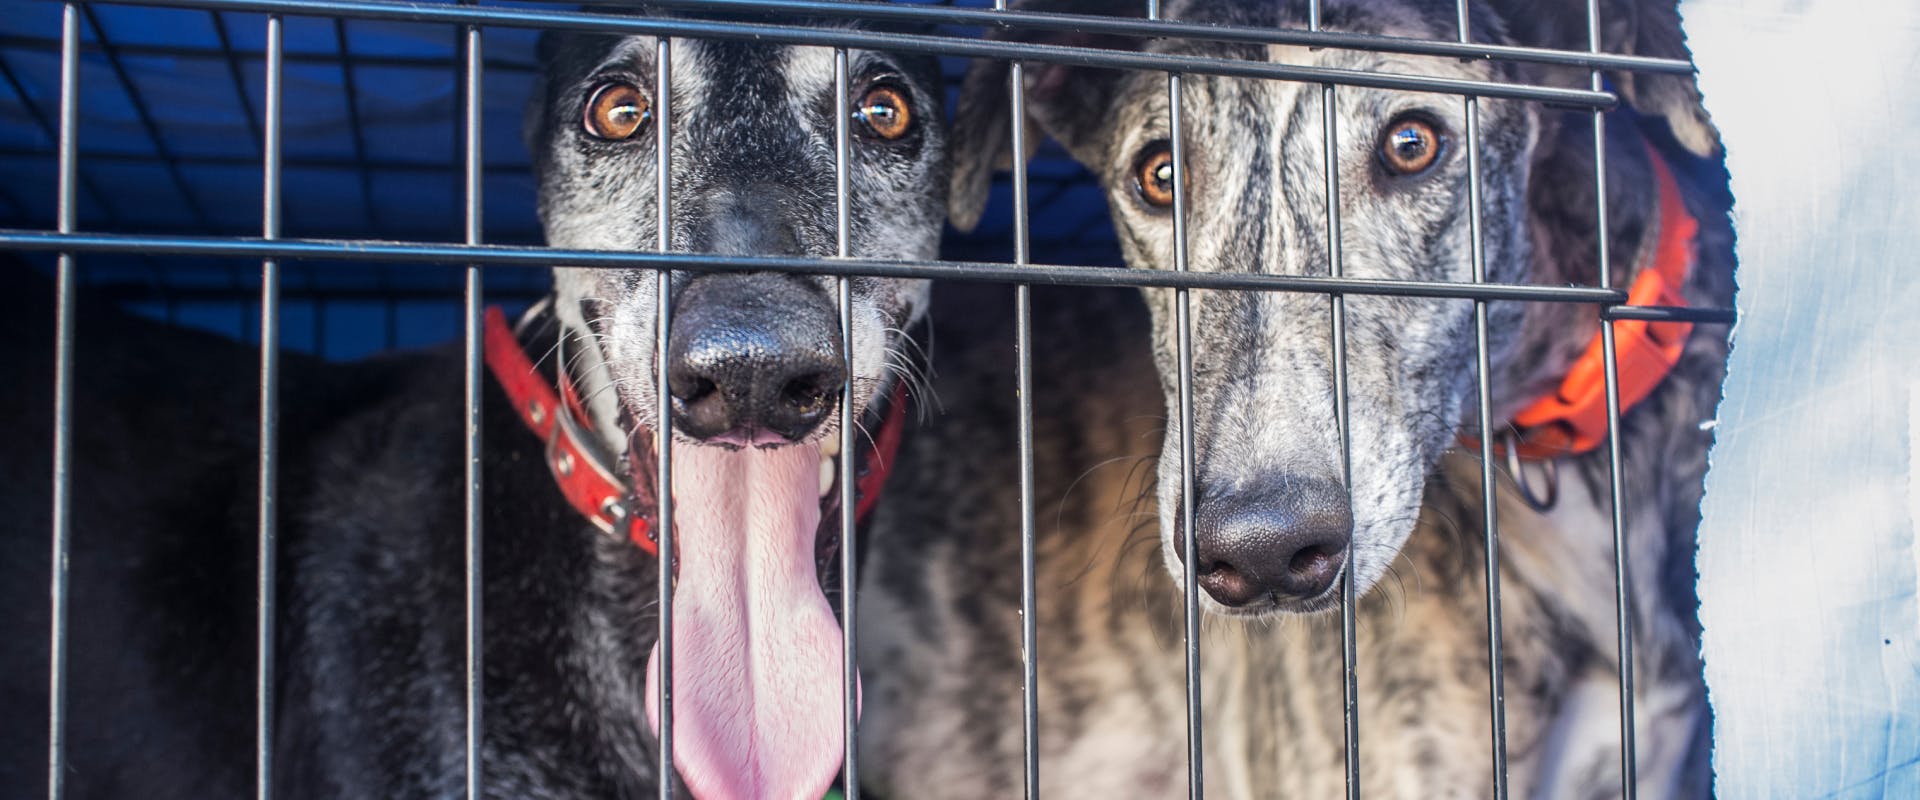 two large dogs in a metal travel dog crate